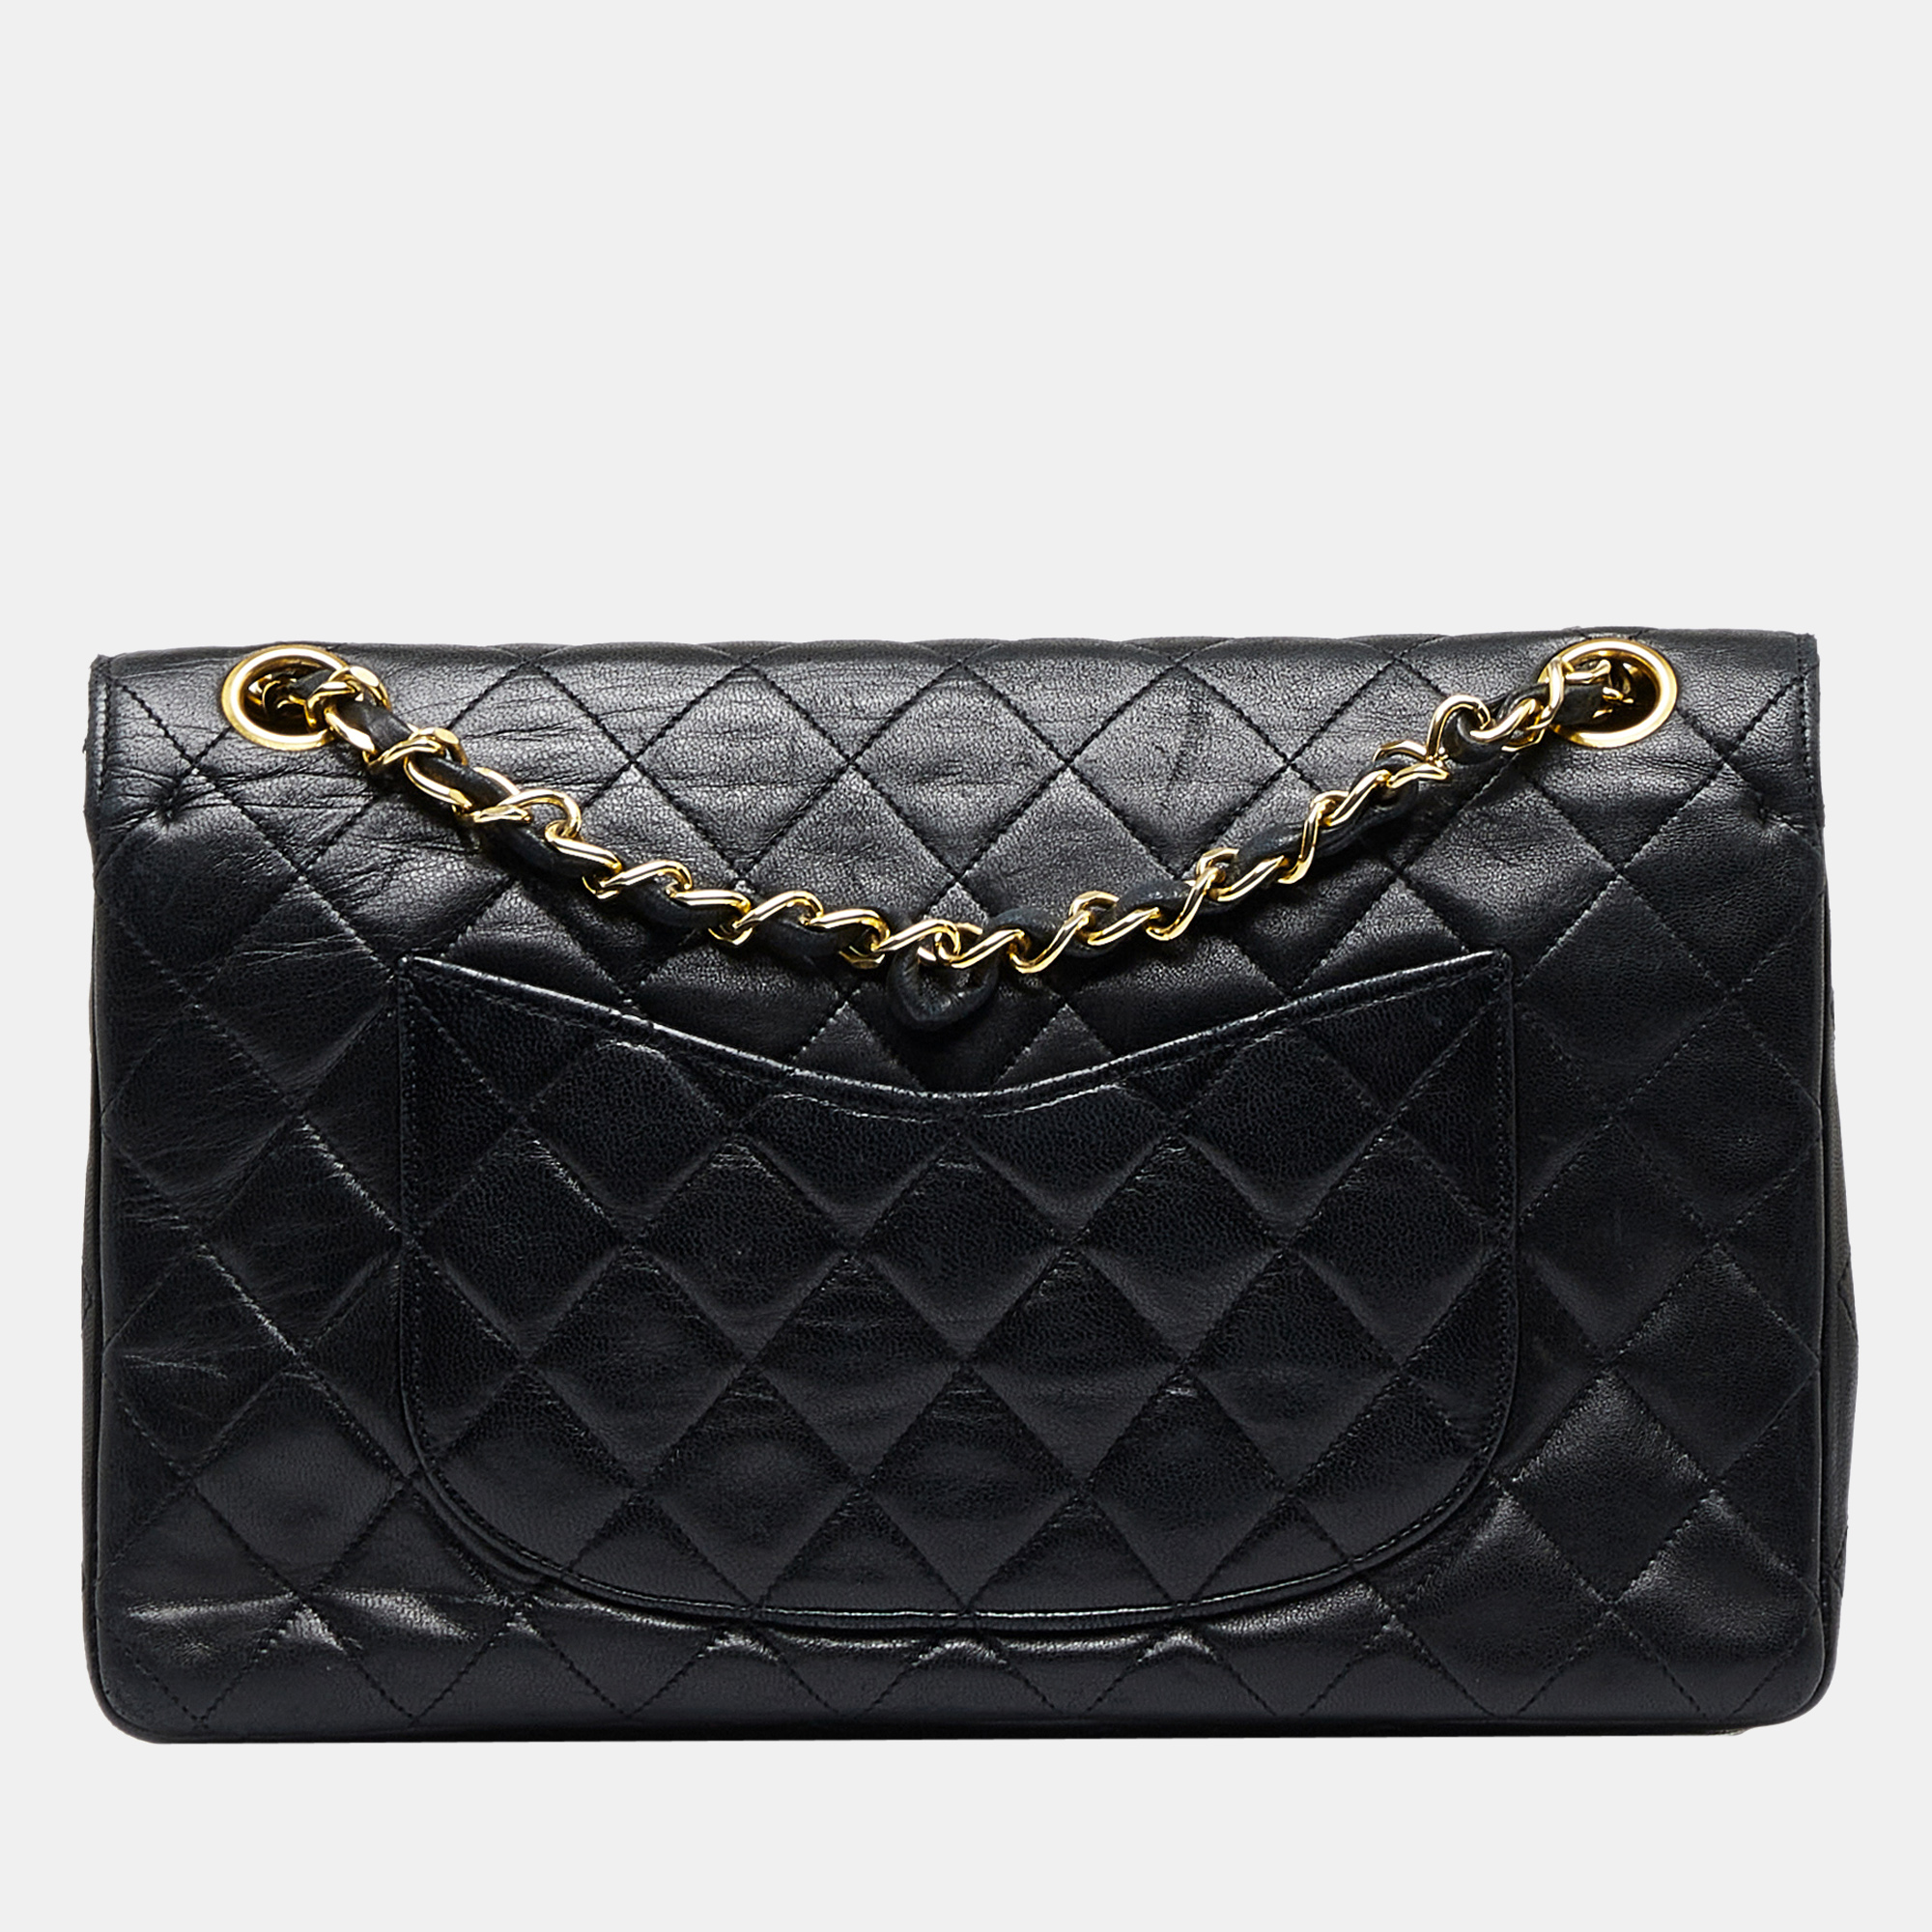 Chanel Black Quilted Lambskin Double Flap Bag